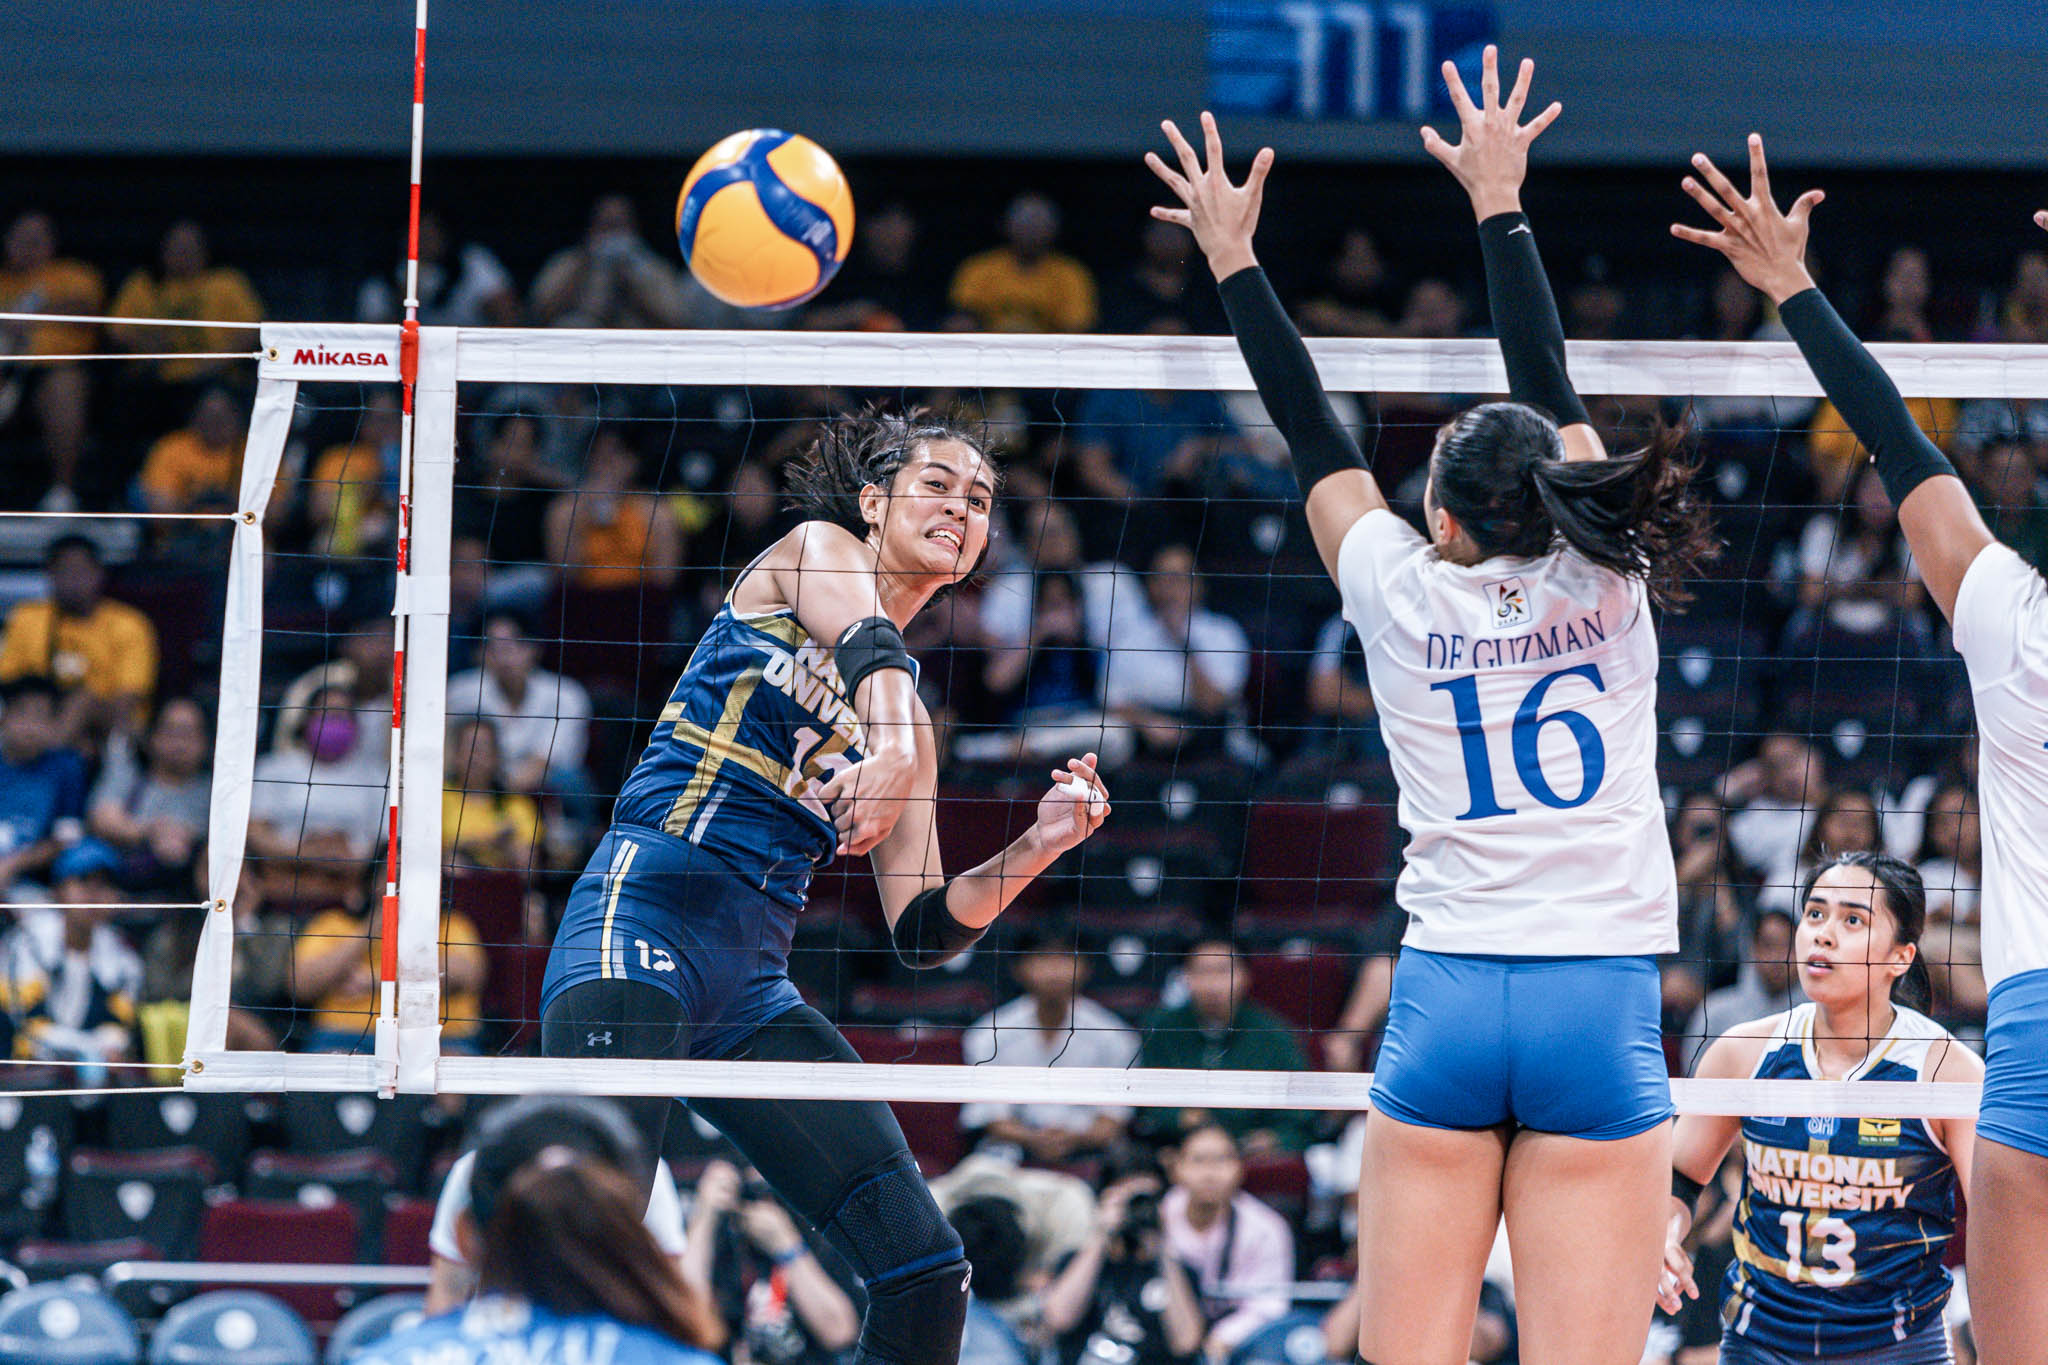 NU makes quick work of Ateneo, closes in on twice-to-beat